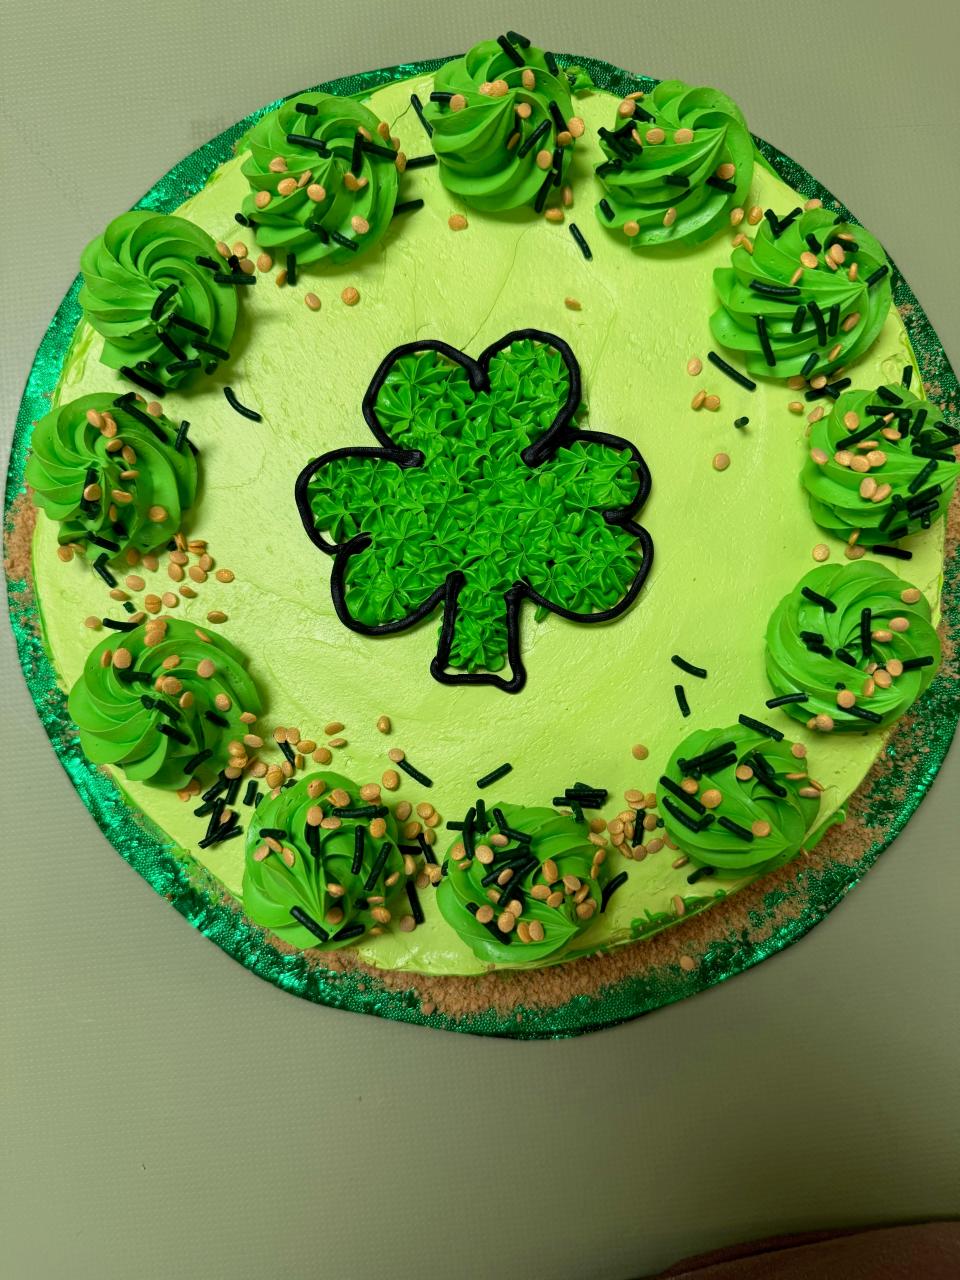 Checkerboard Cheesecake in Alliance is serving up two sizes of this shamrock cheesecake.